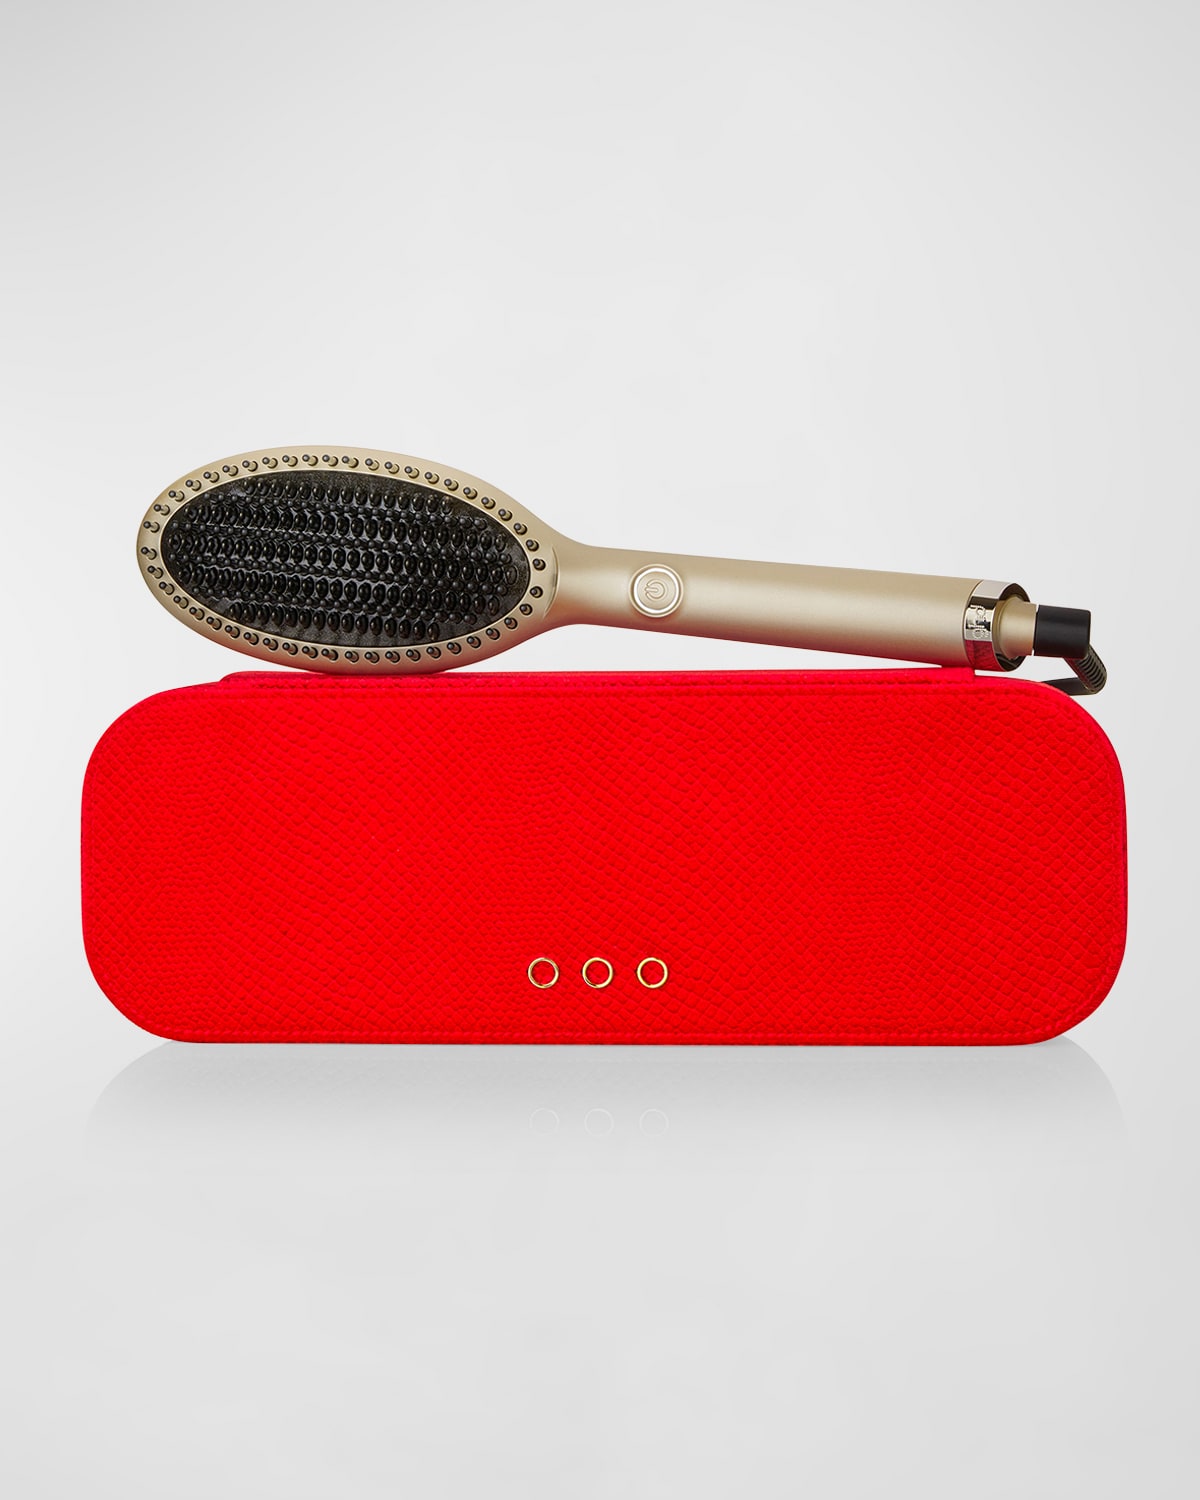 ghd Glide Smoothing Hot Brush with Bag, Champagne Gold - Limited Edition